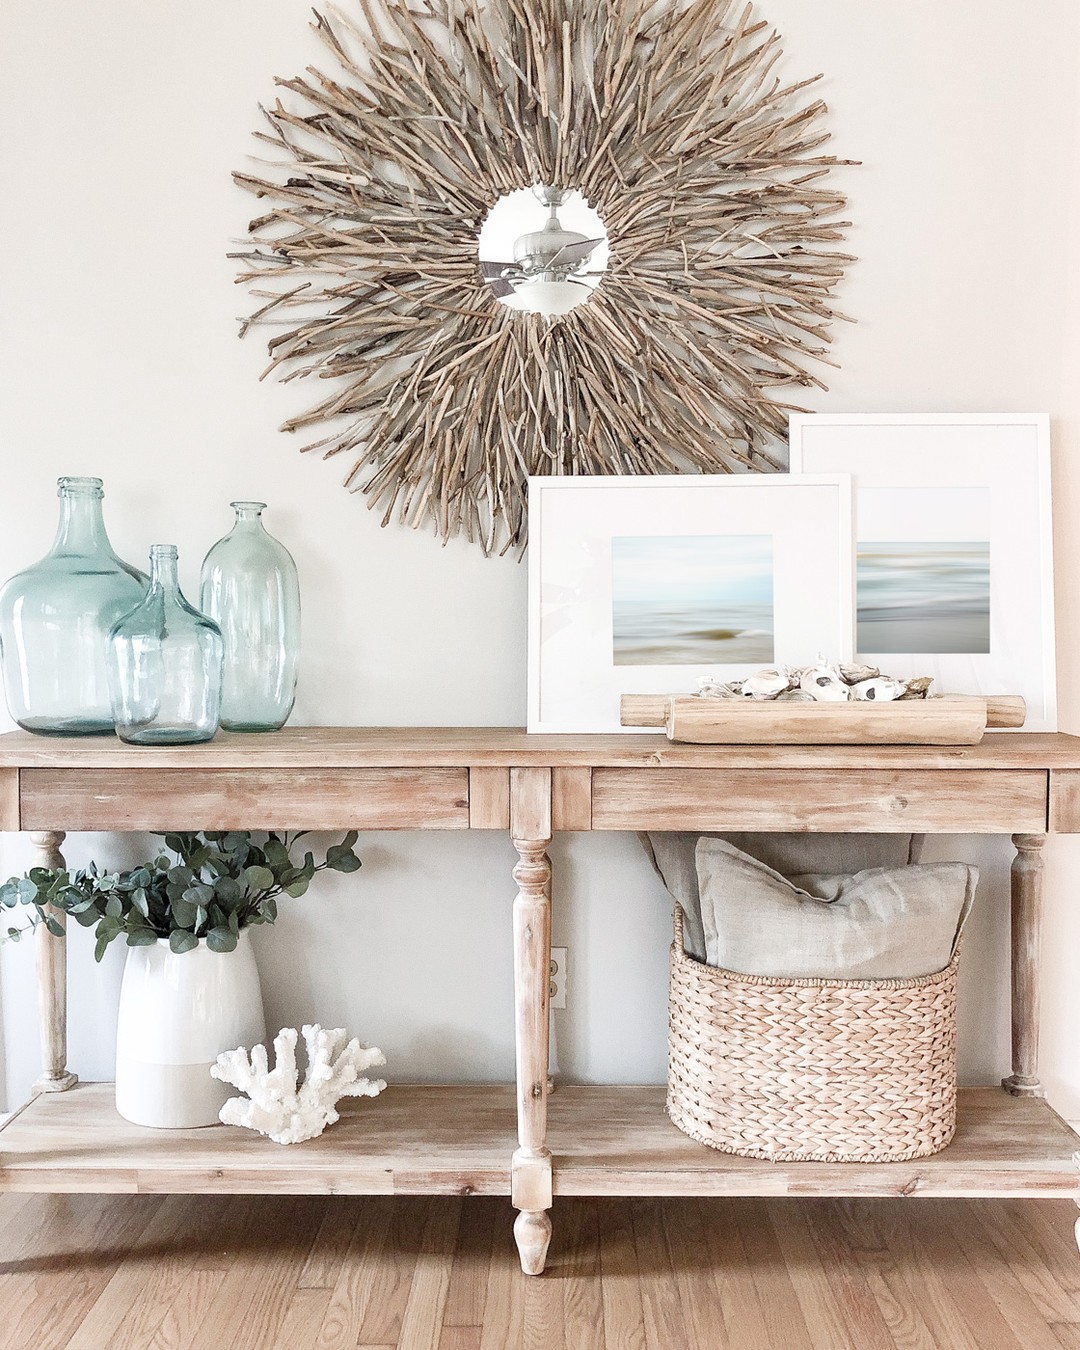 Coastal-Inspired Decor: Bring the Beach to Your Living Room